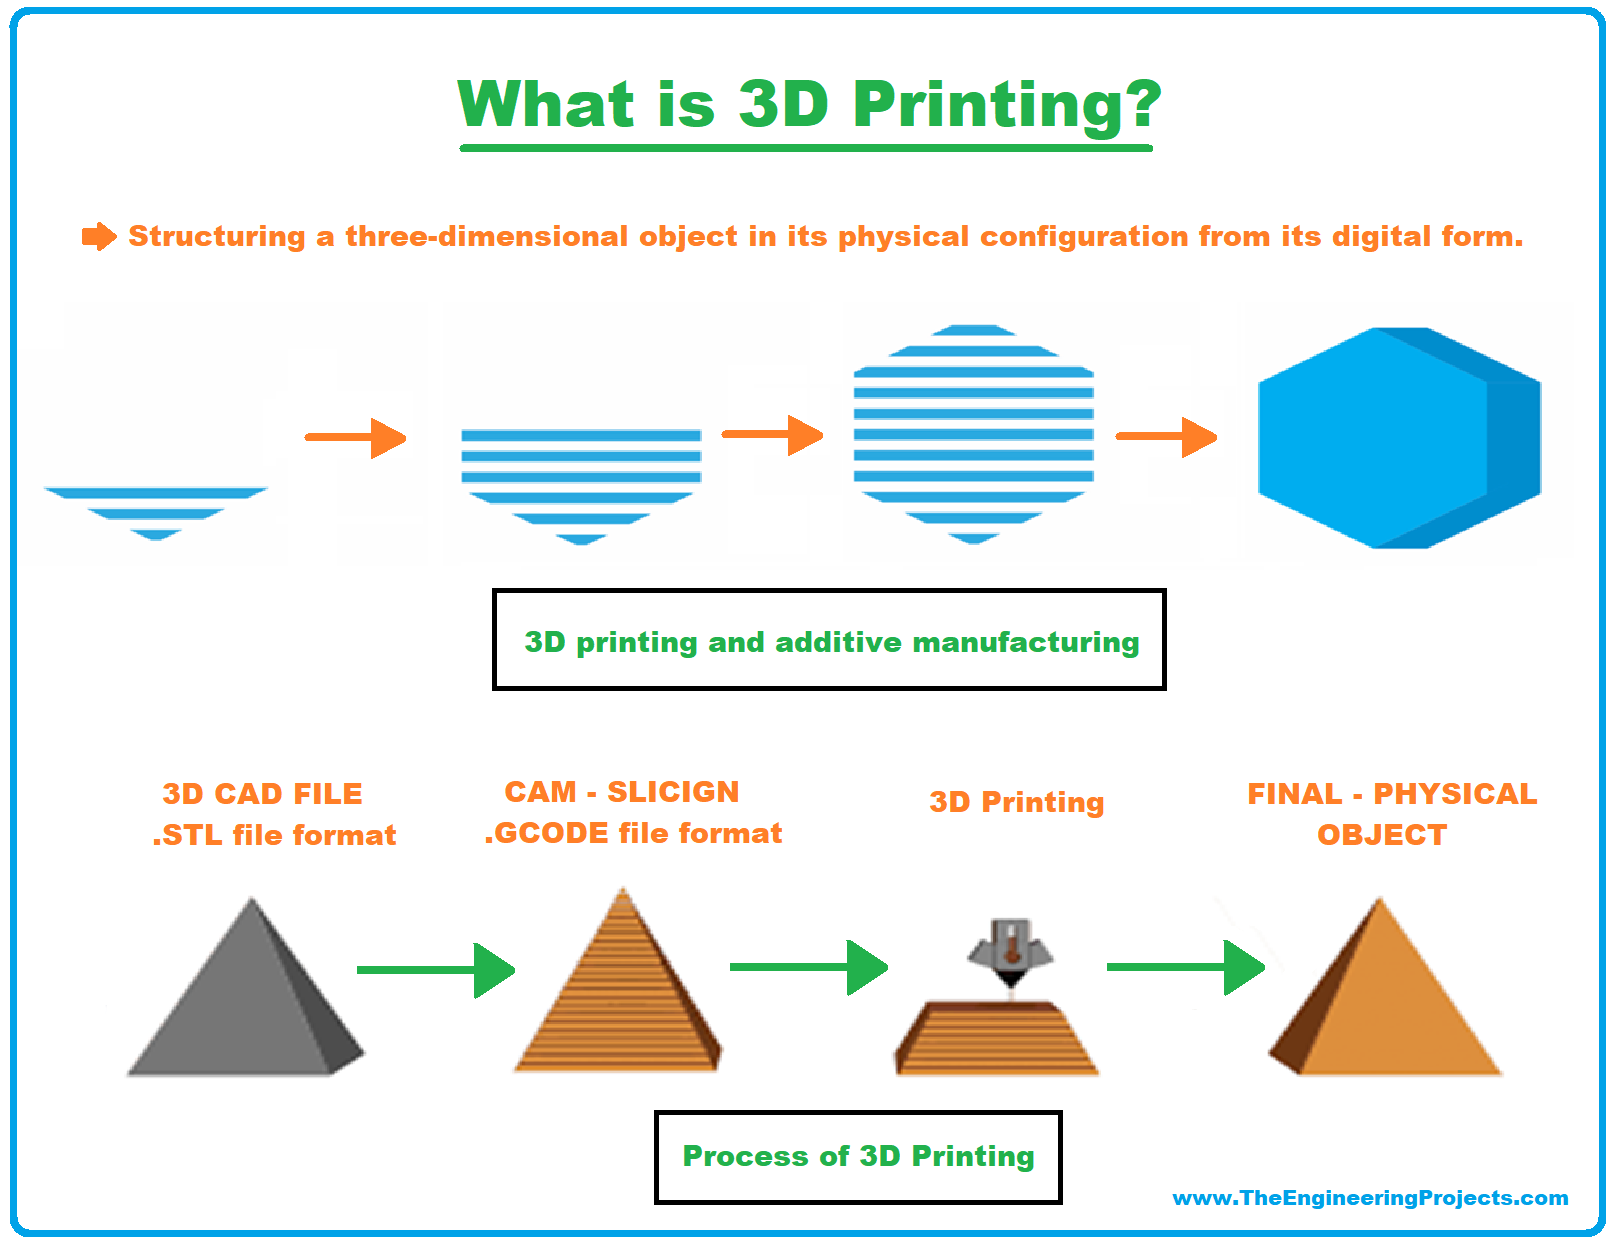 finansiere Abnorm Med andre band What is 3D Printing? Definition, Technology and Applications - The  Engineering Projects